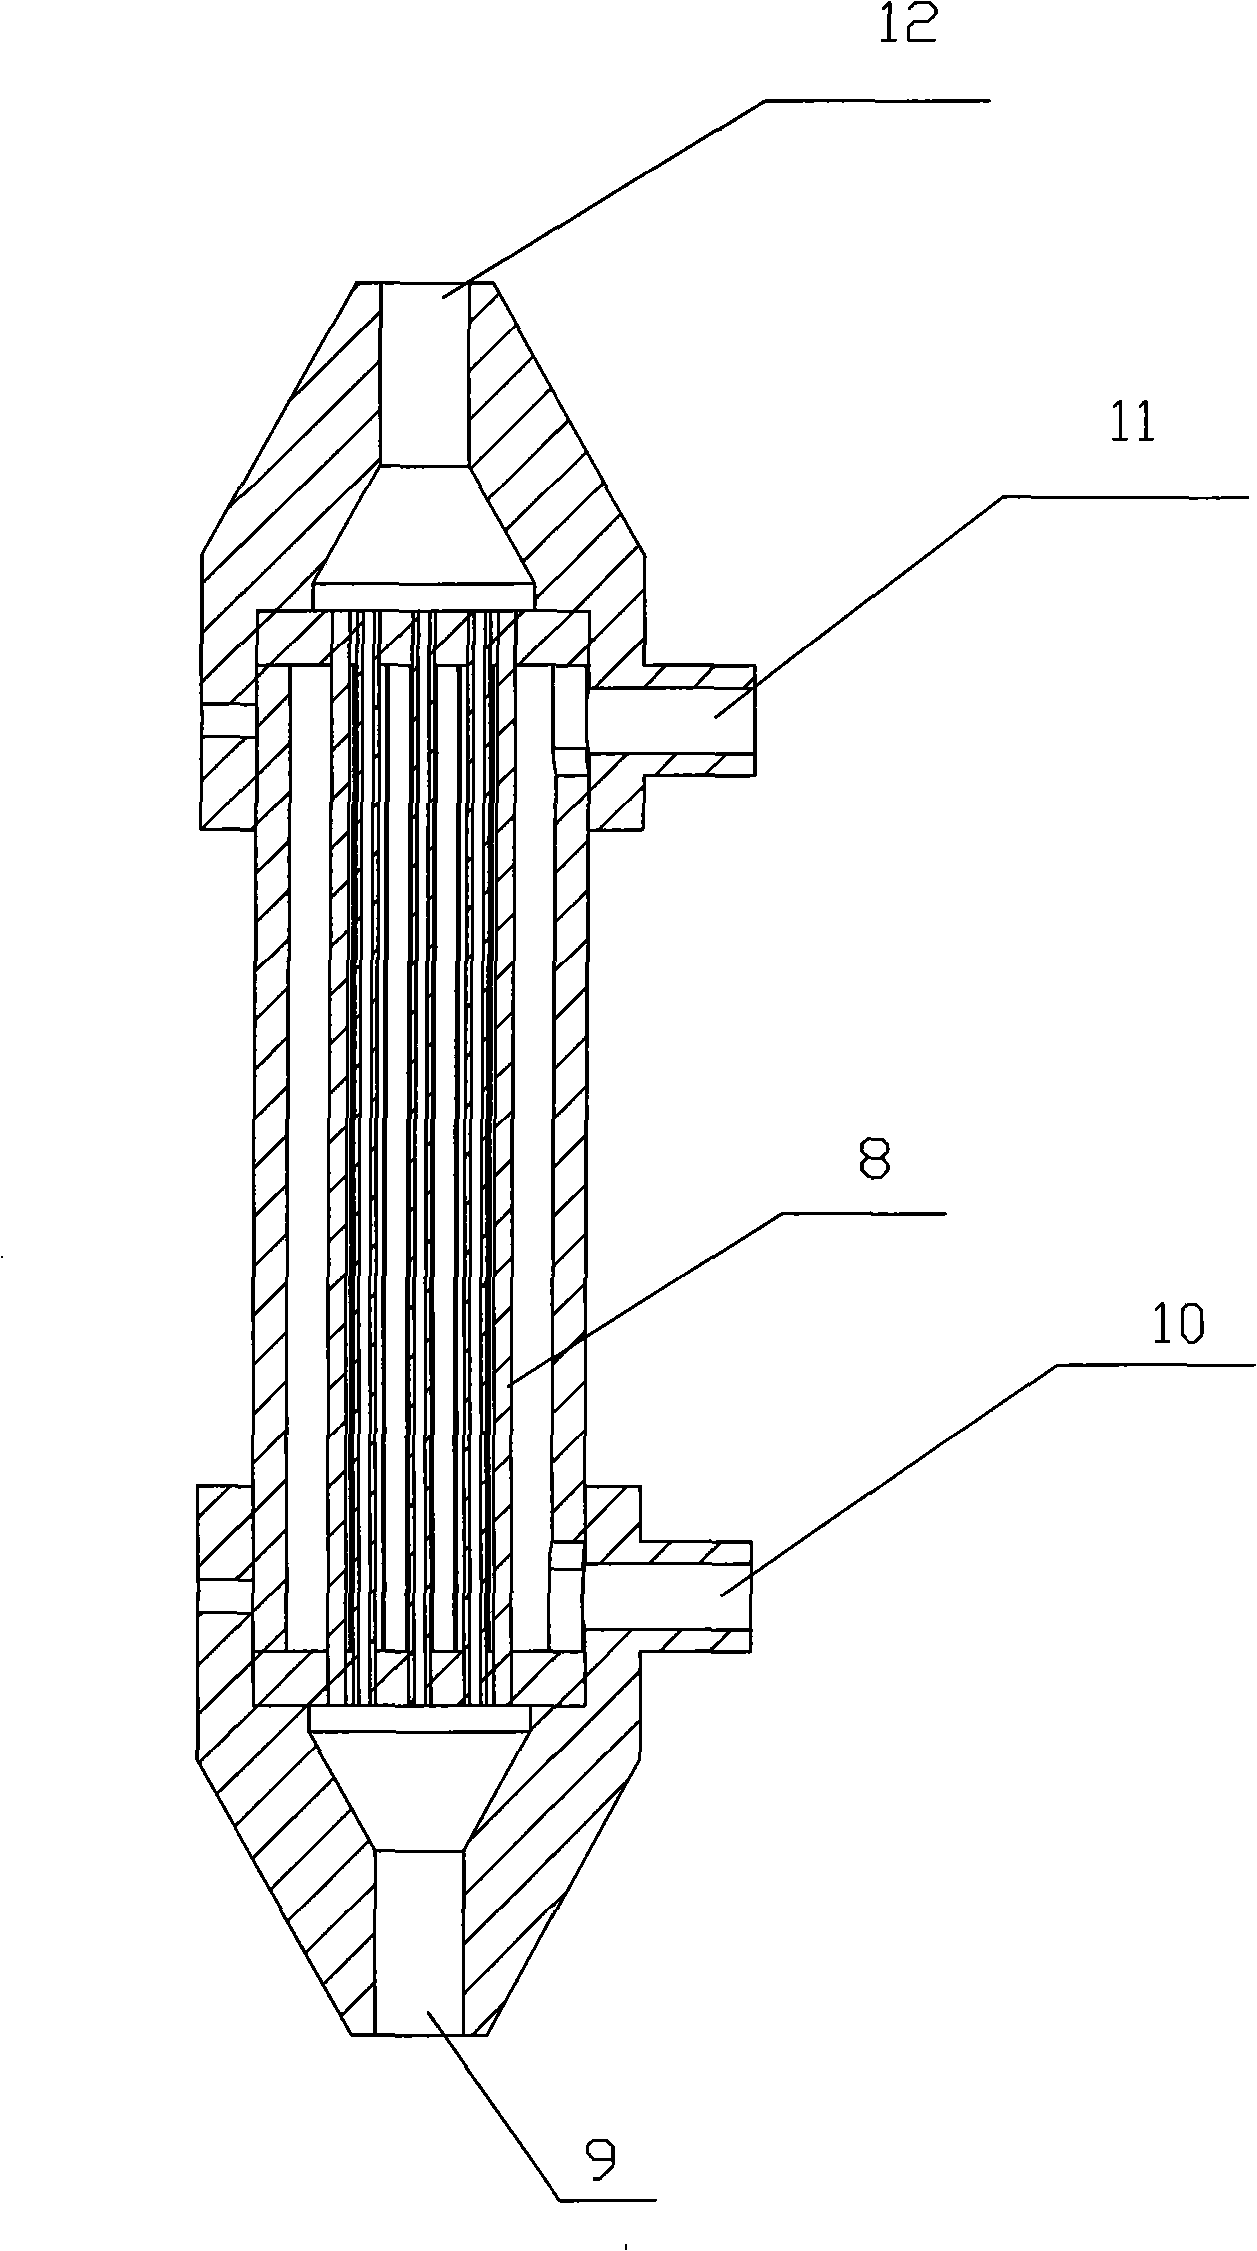 Method for removing moisture in gases by a Nafion tube